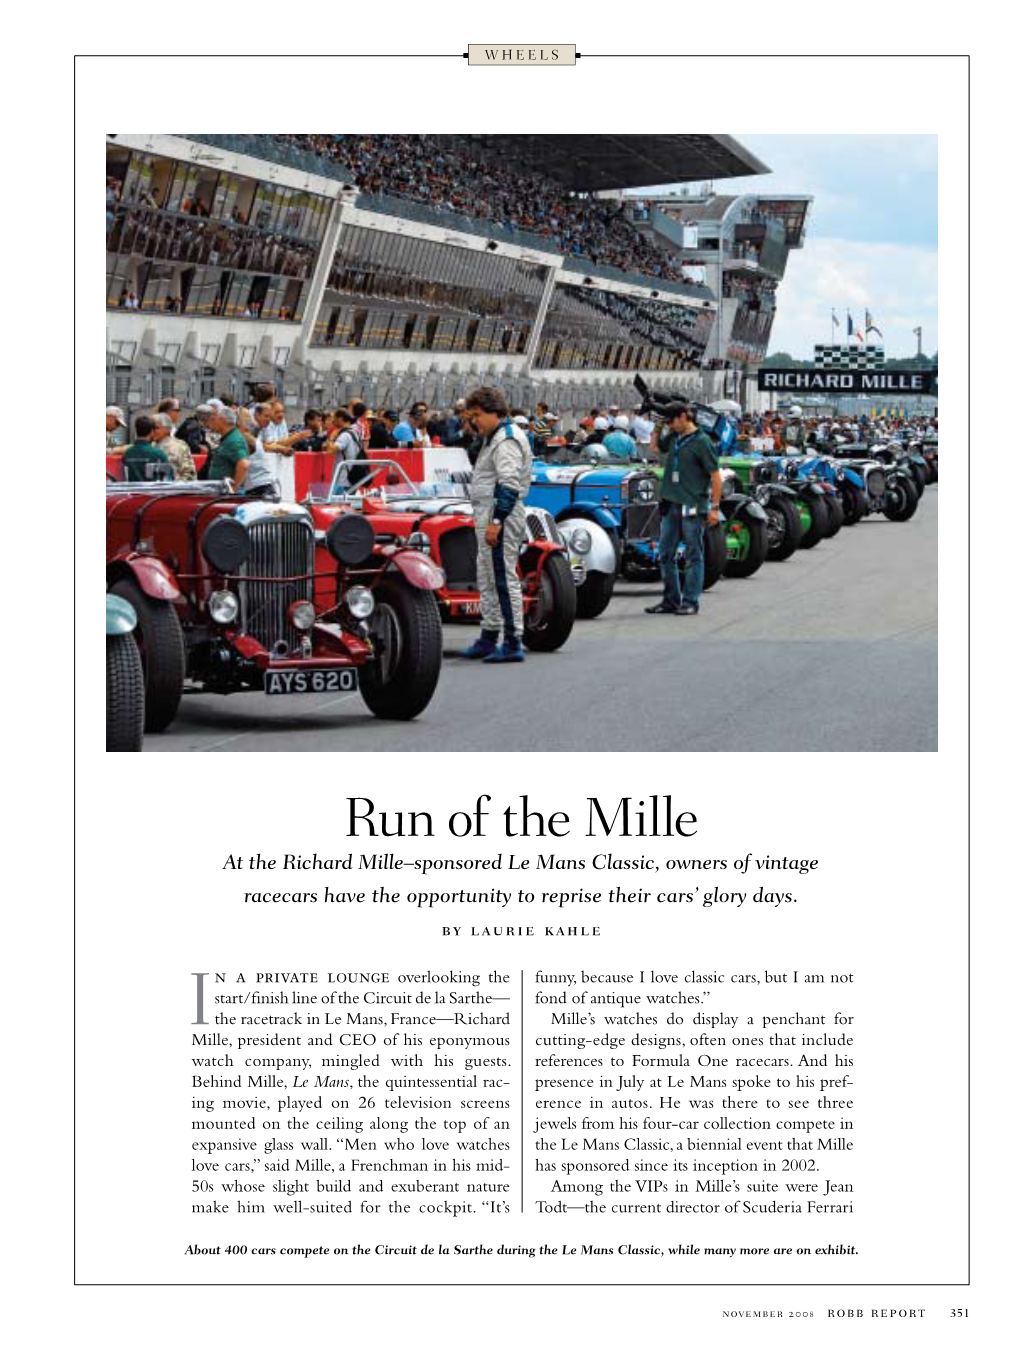 Run of the Mille at the Richard Mille–Sponsored Le Mans Classic, Owners of Vintage Racecars Have the Opportunity to Reprise Their Cars’ Glory Days